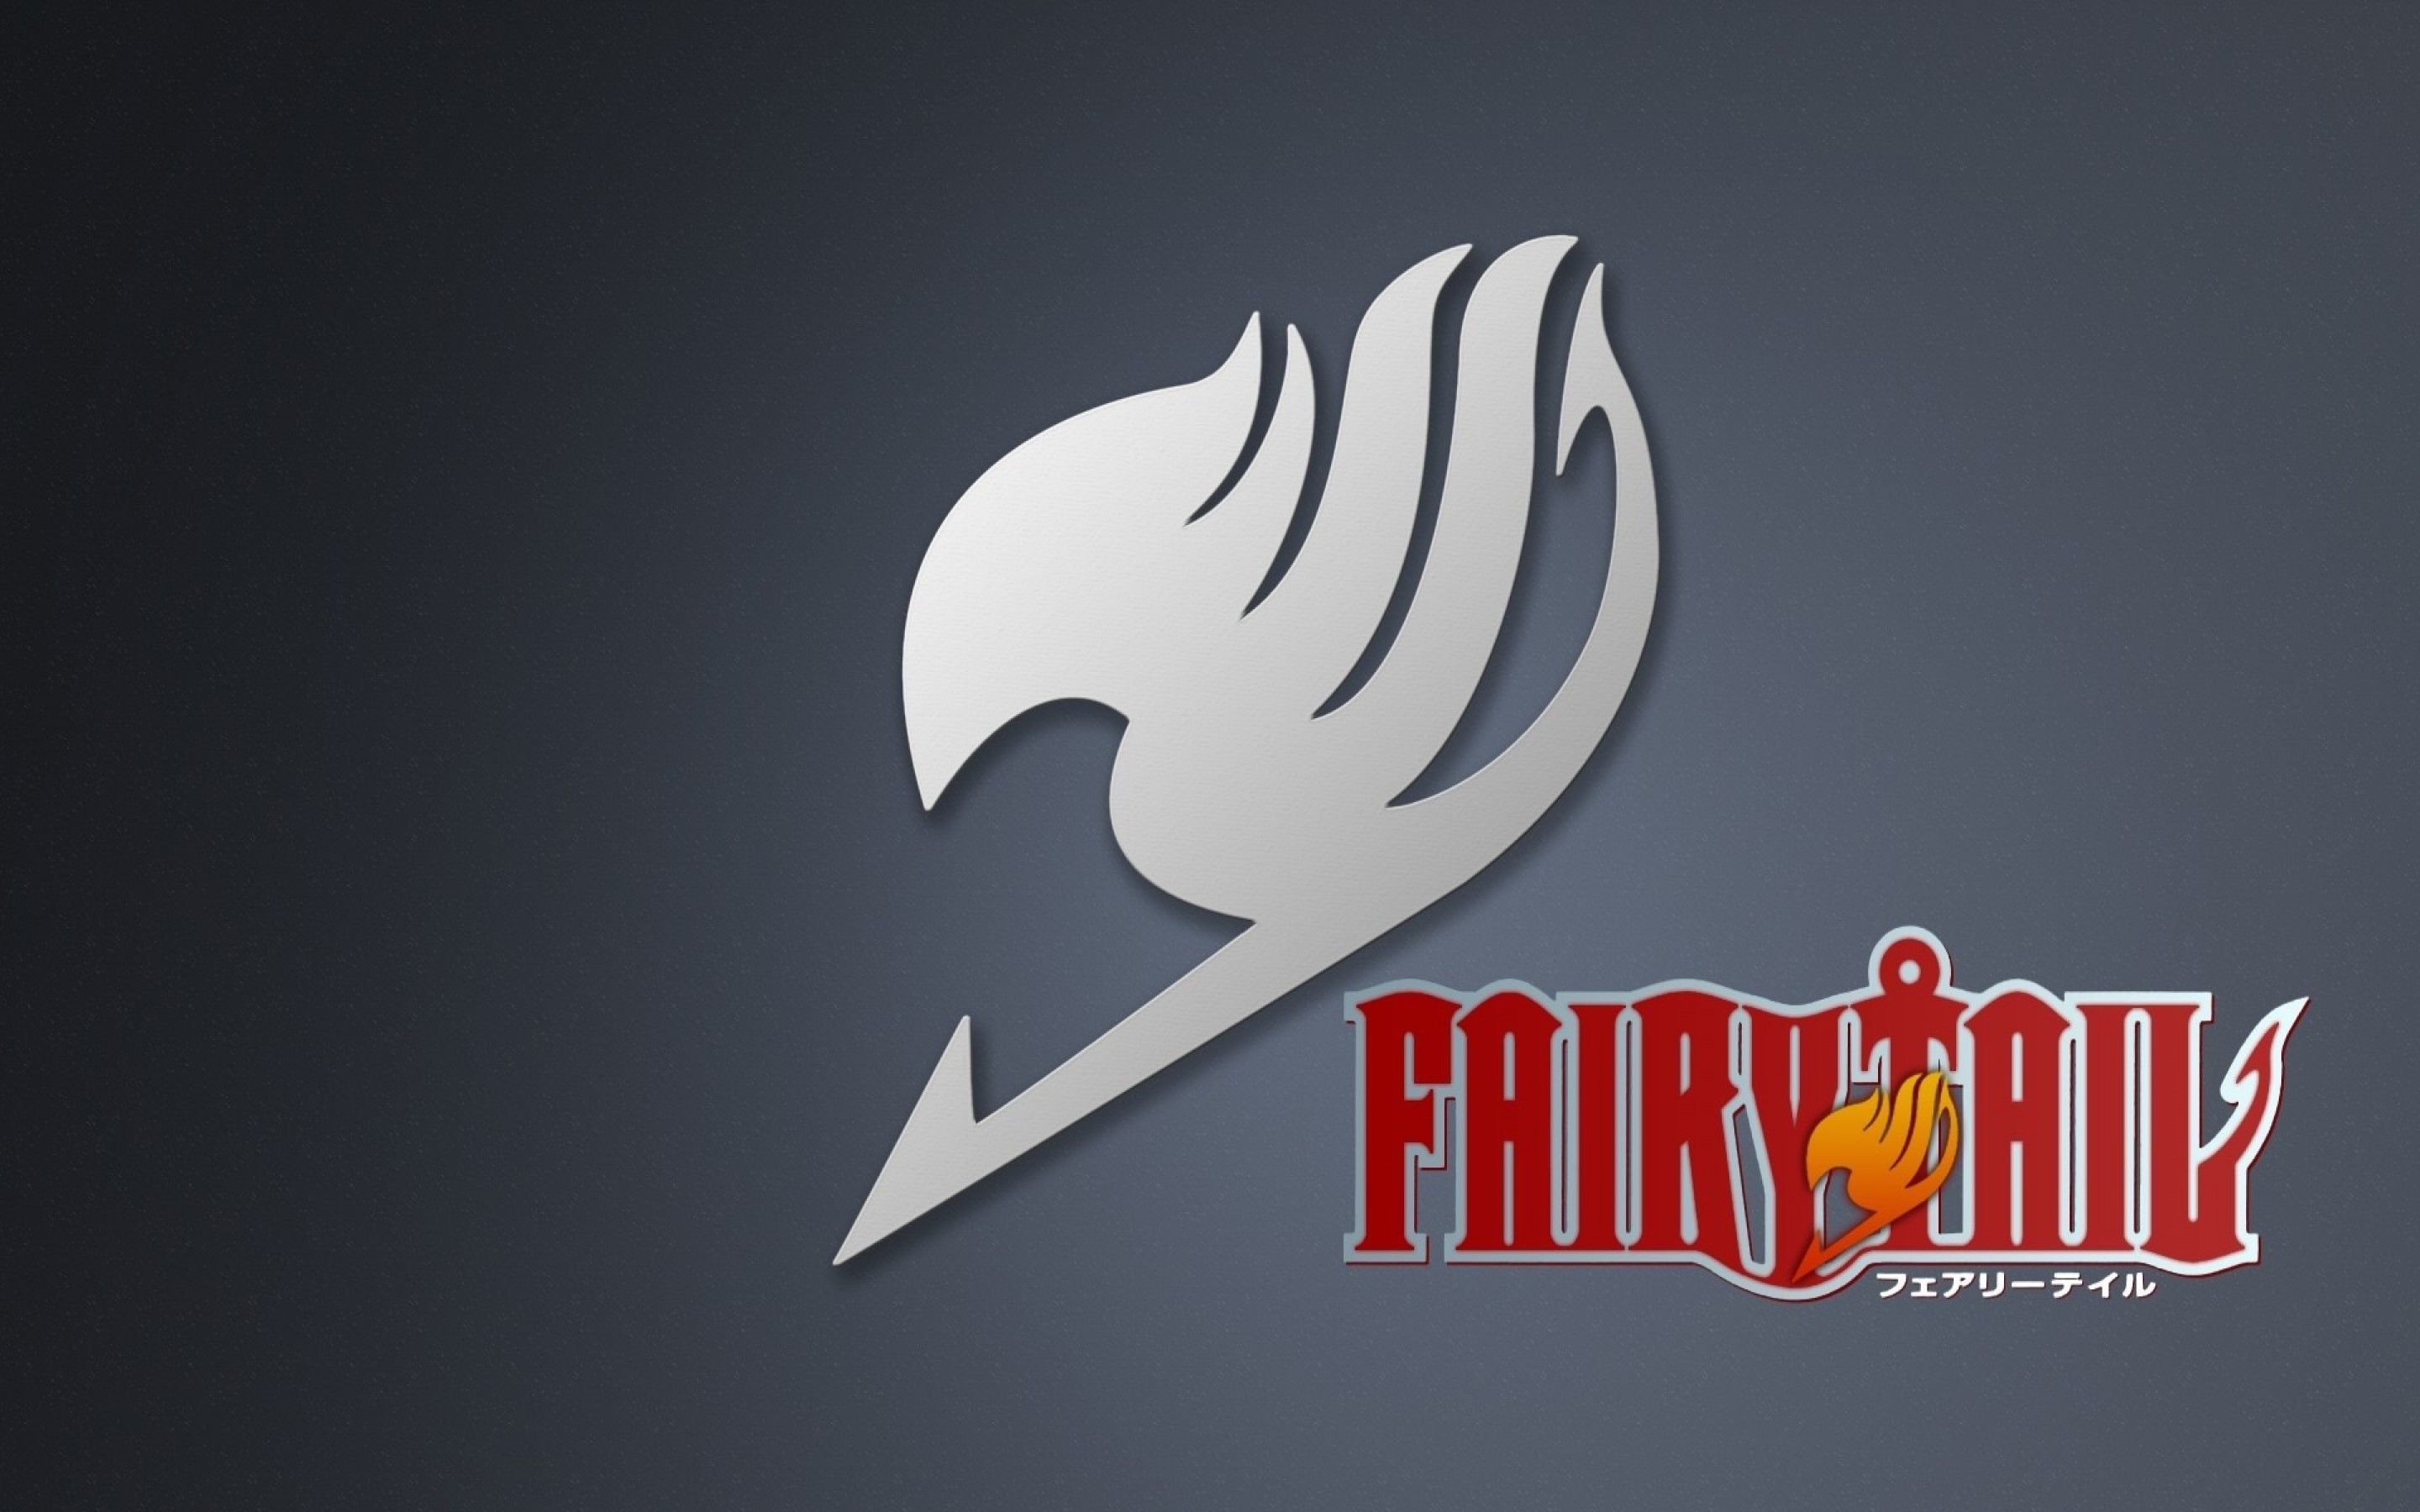 2880x1800 ... Fairytail Anime Wallpapers Collection ...